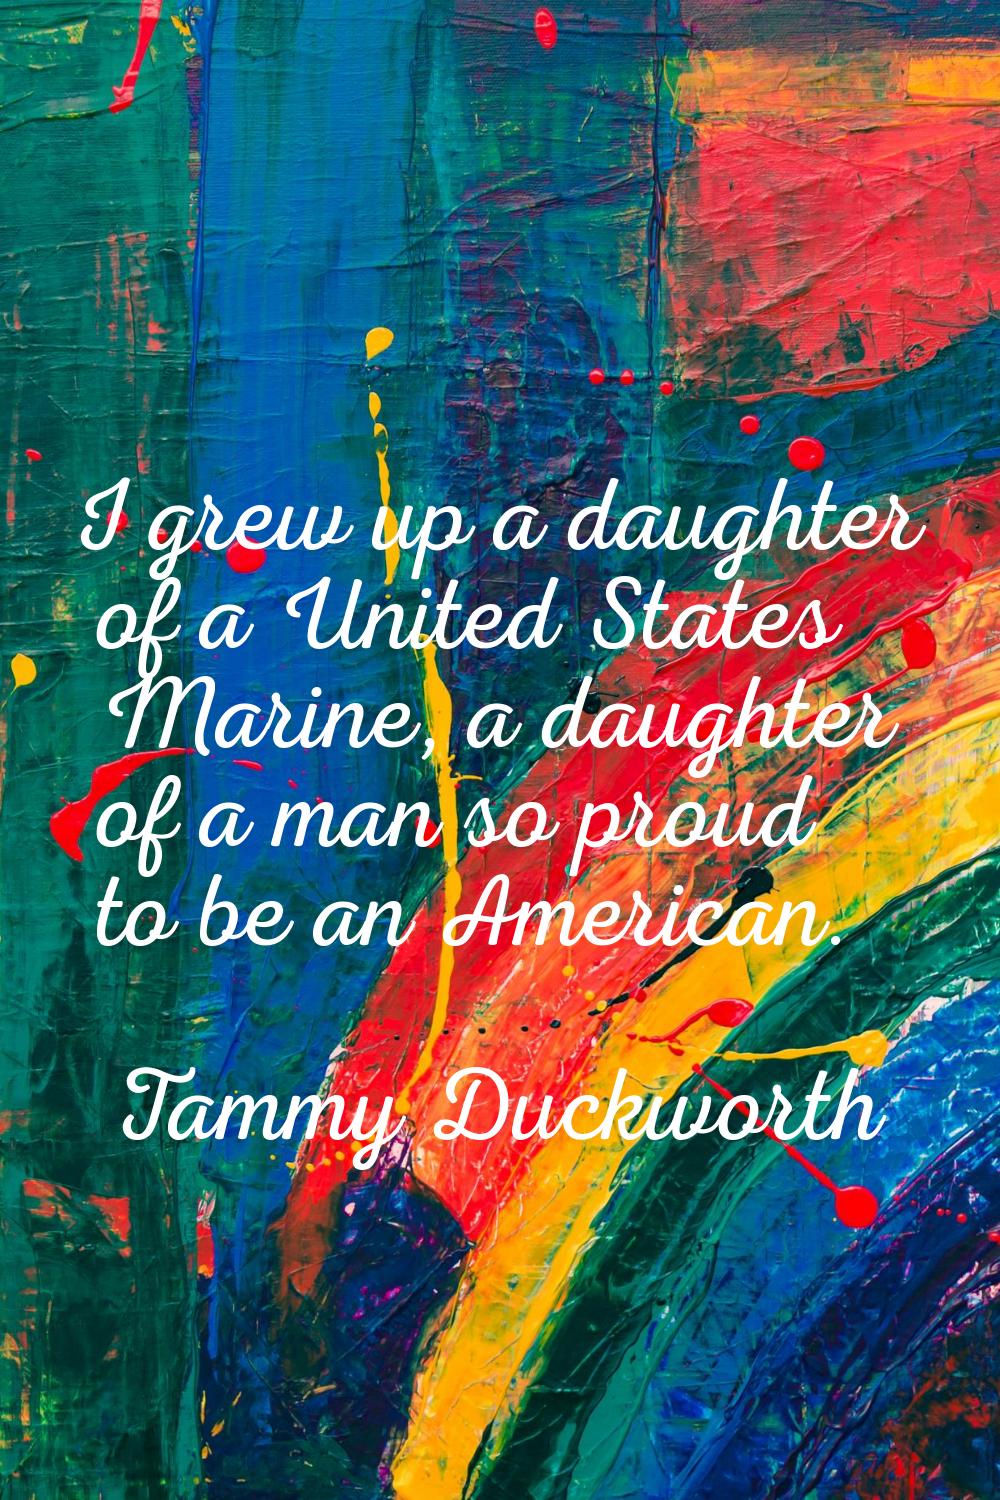 I grew up a daughter of a United States Marine, a daughter of a man so proud to be an American.